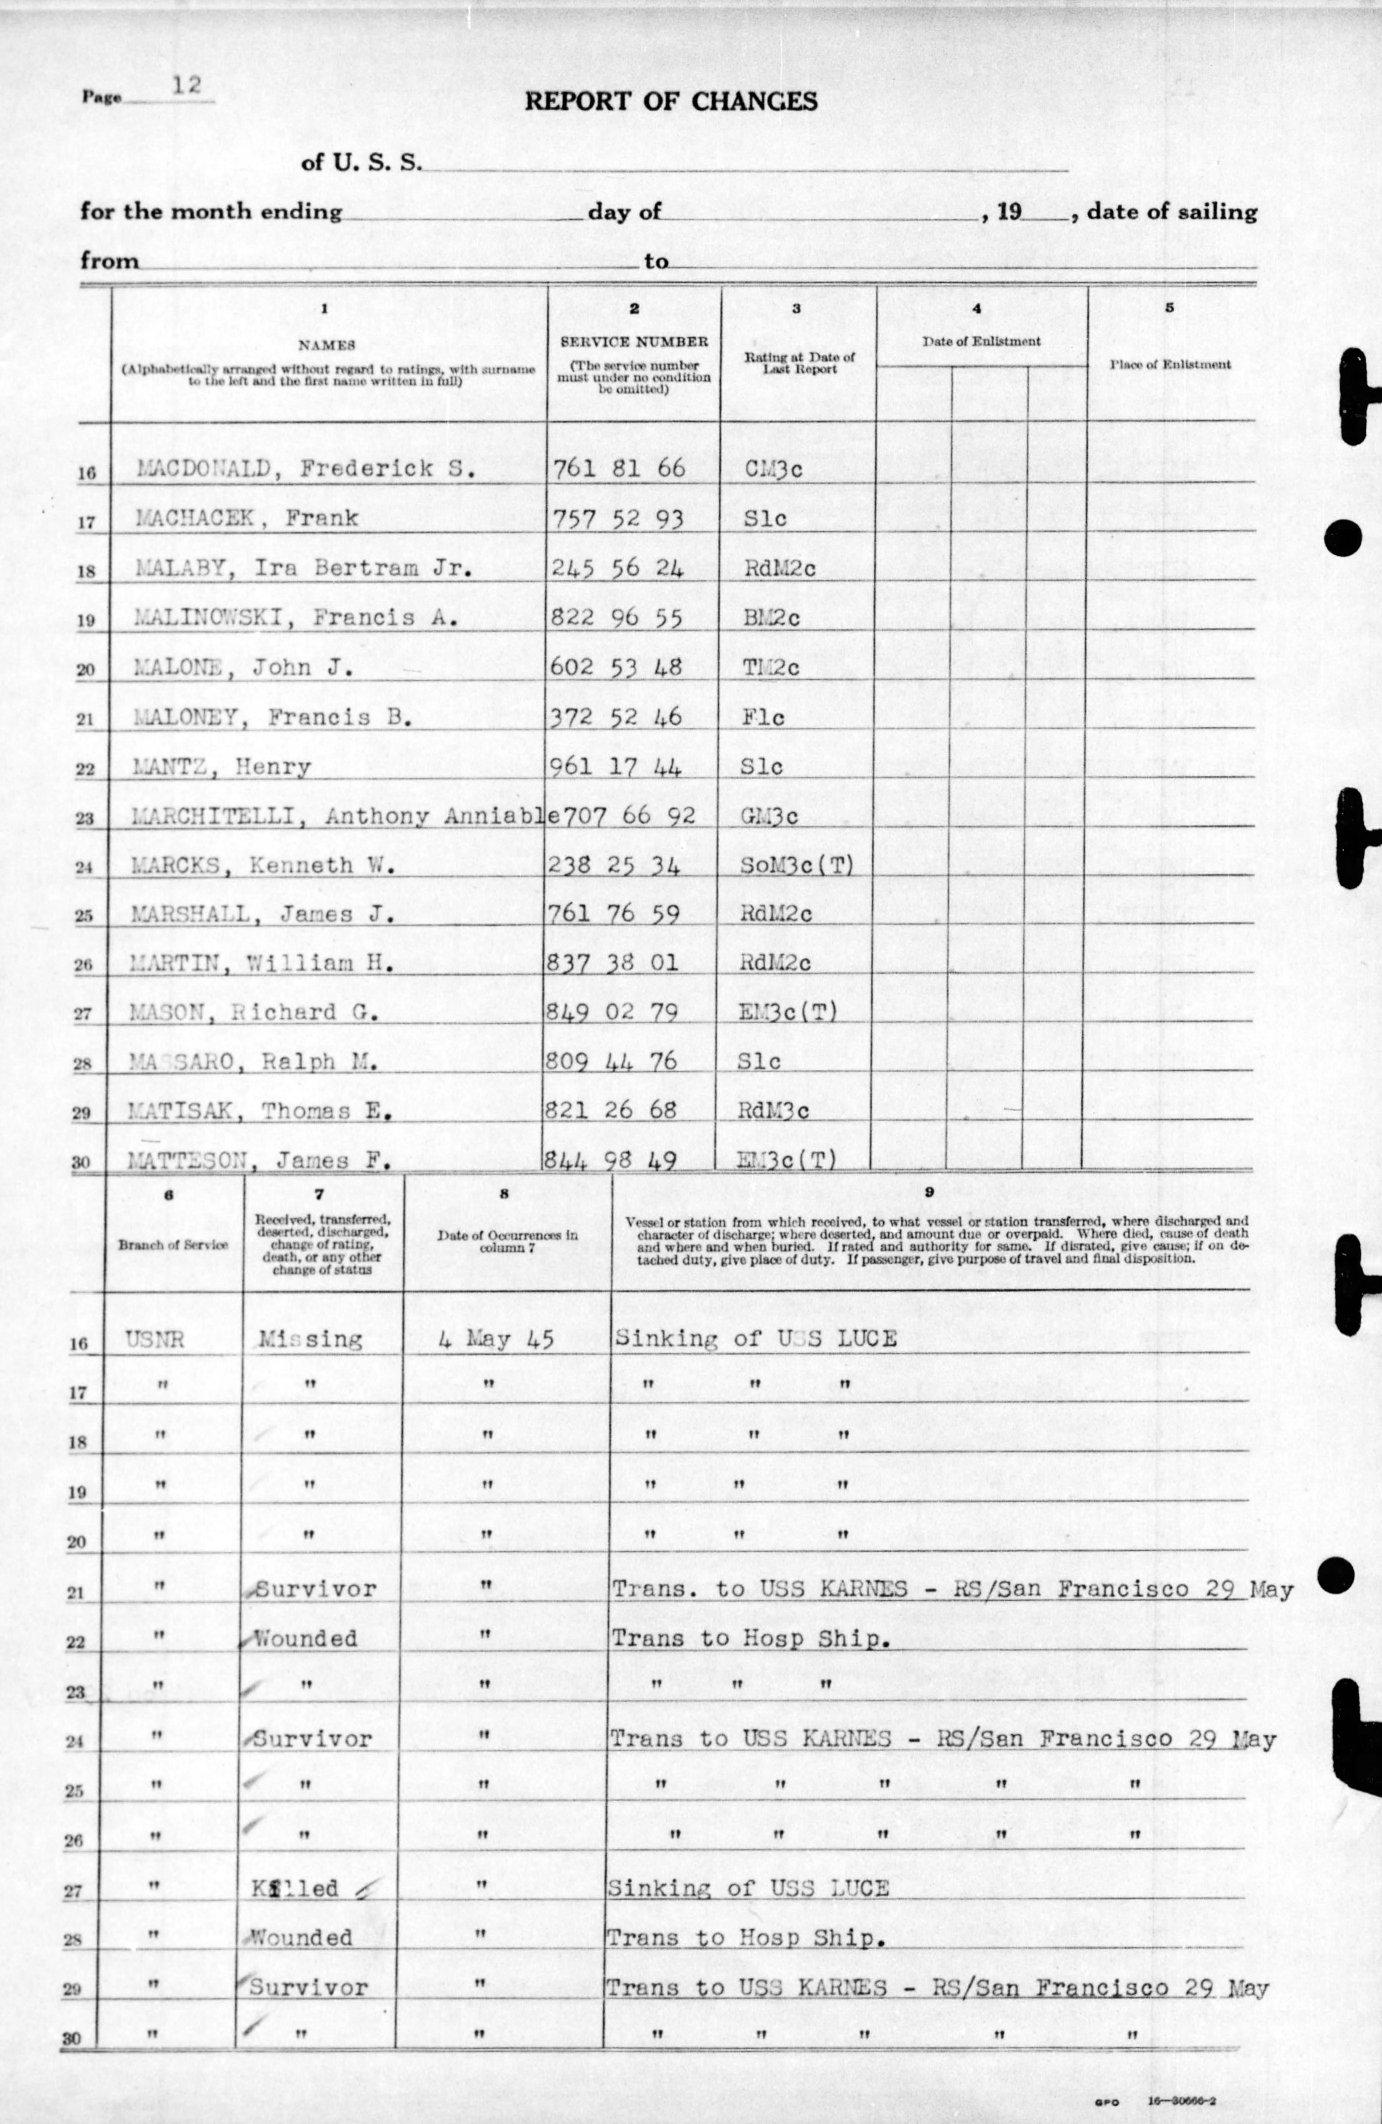 USS Luce final muster list dated June 19, 1945 after the ship was sunk May 4, 1945. Page 14 of 25.